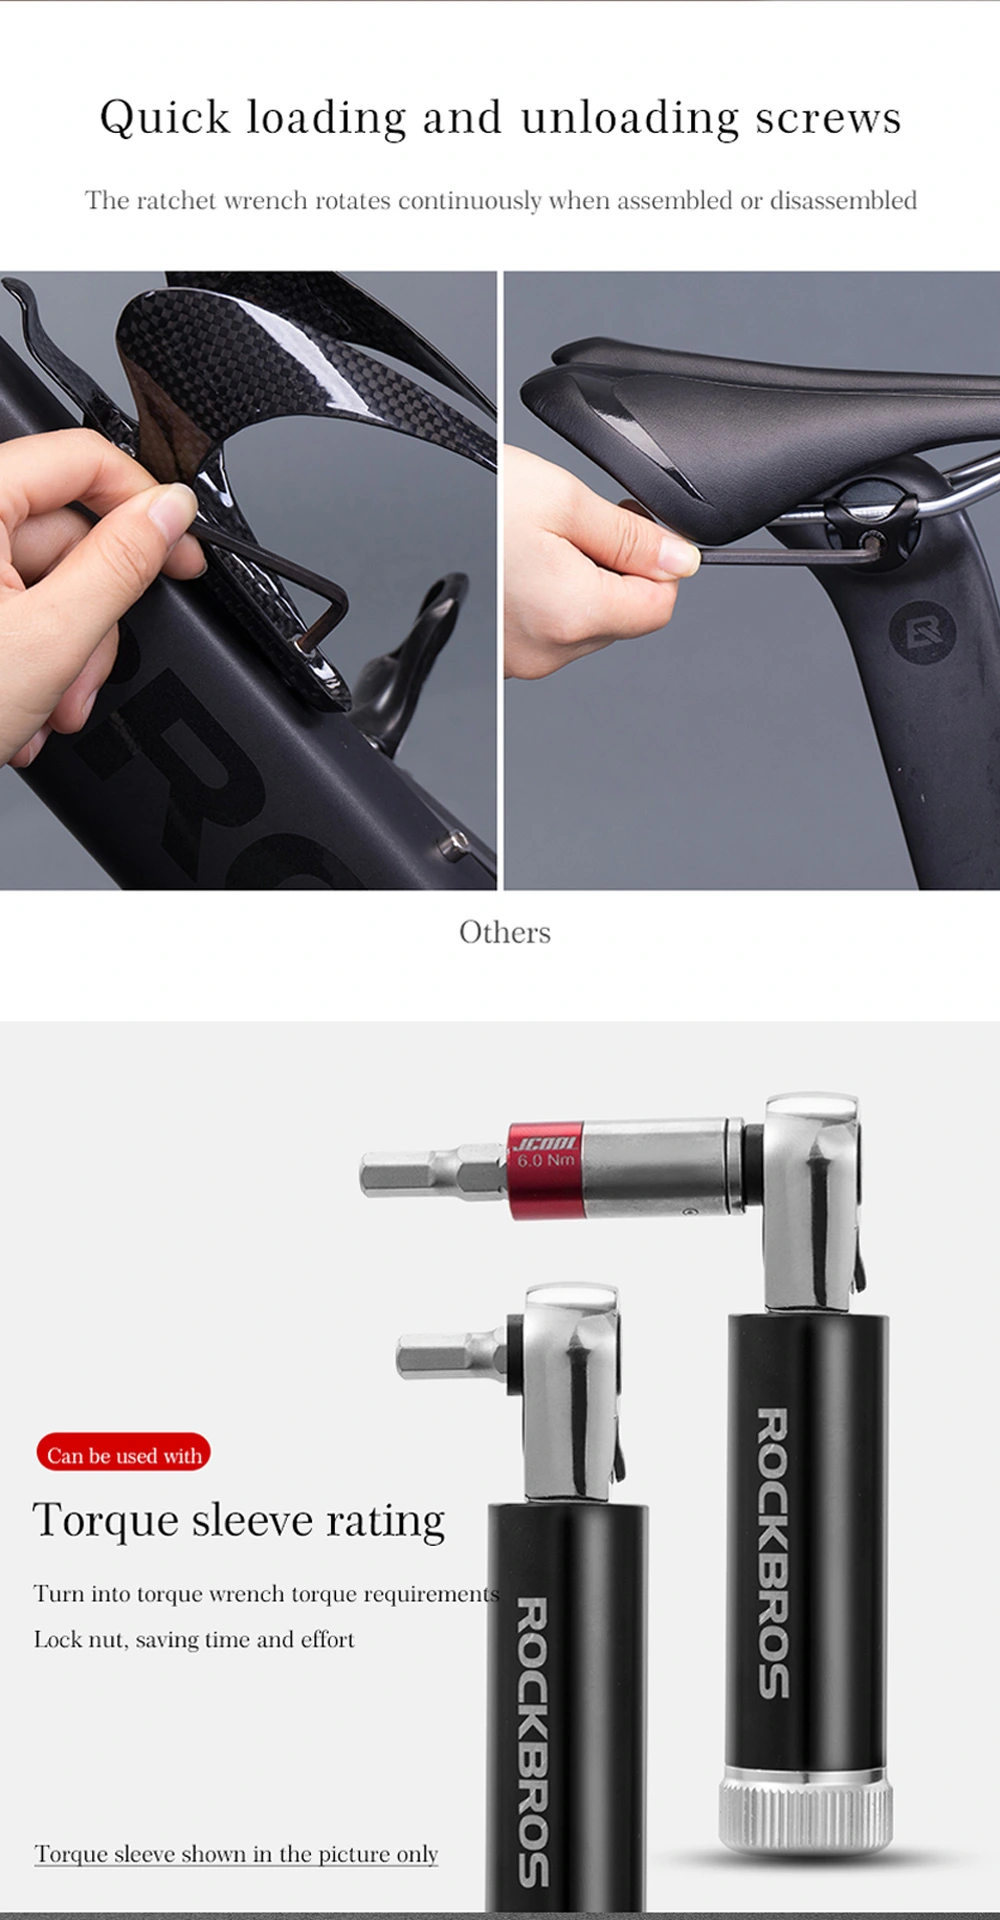 China Made Rockbros Torque Wrench Bicycle Repair Tool Kit for Daily Maintenance